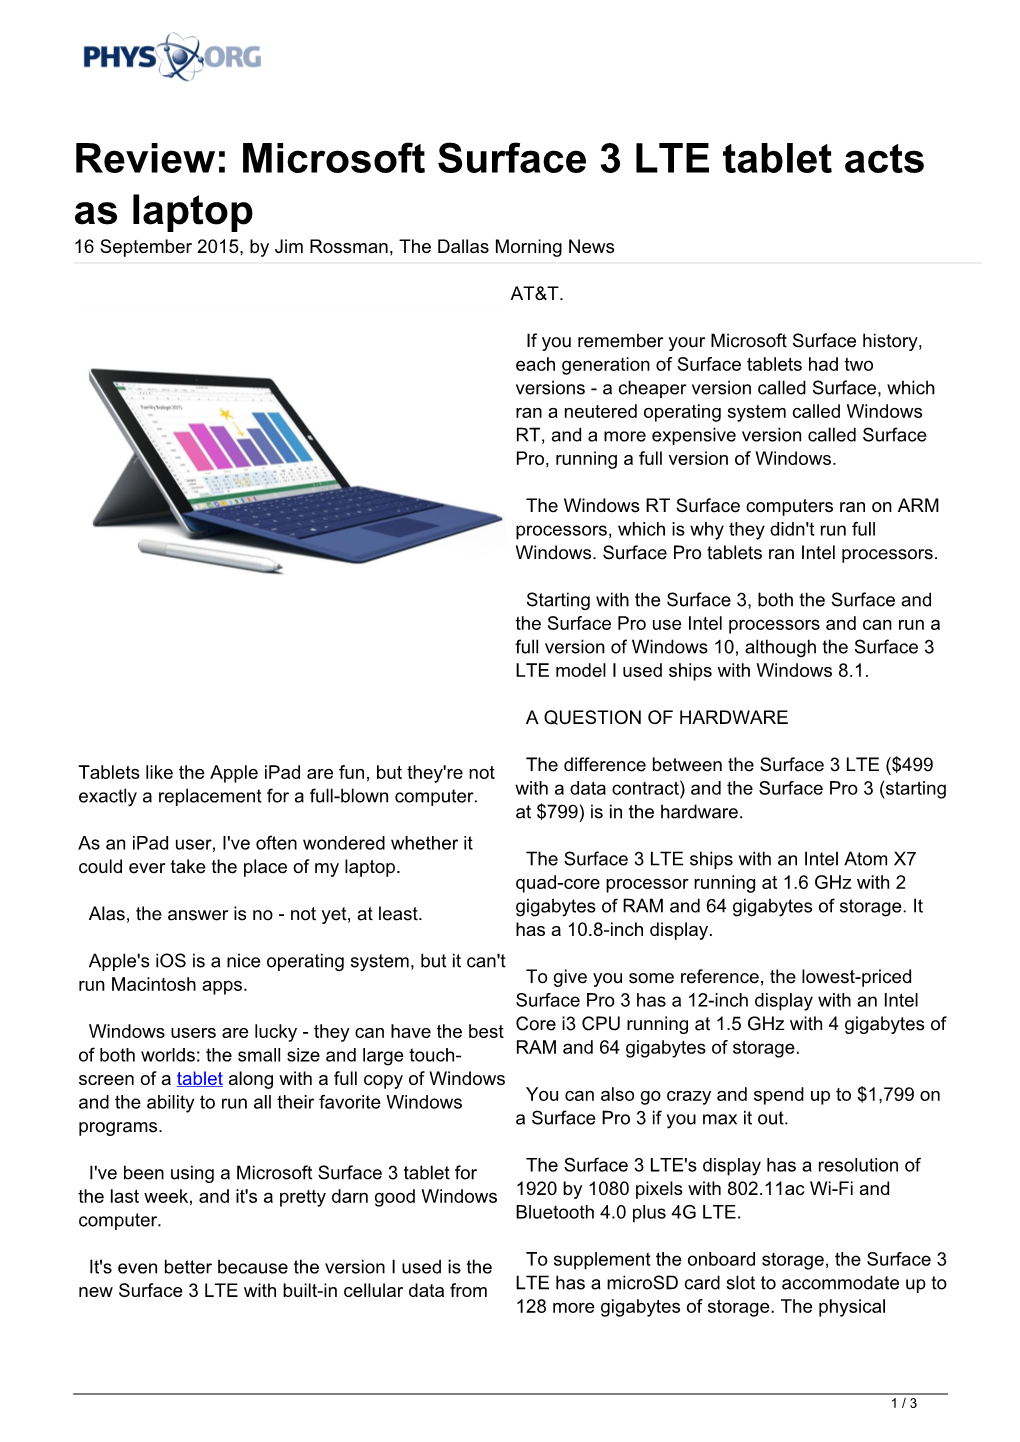 Review: Microsoft Surface 3 LTE Tablet Acts As Laptop 16 September 2015, by Jim Rossman, the Dallas Morning News